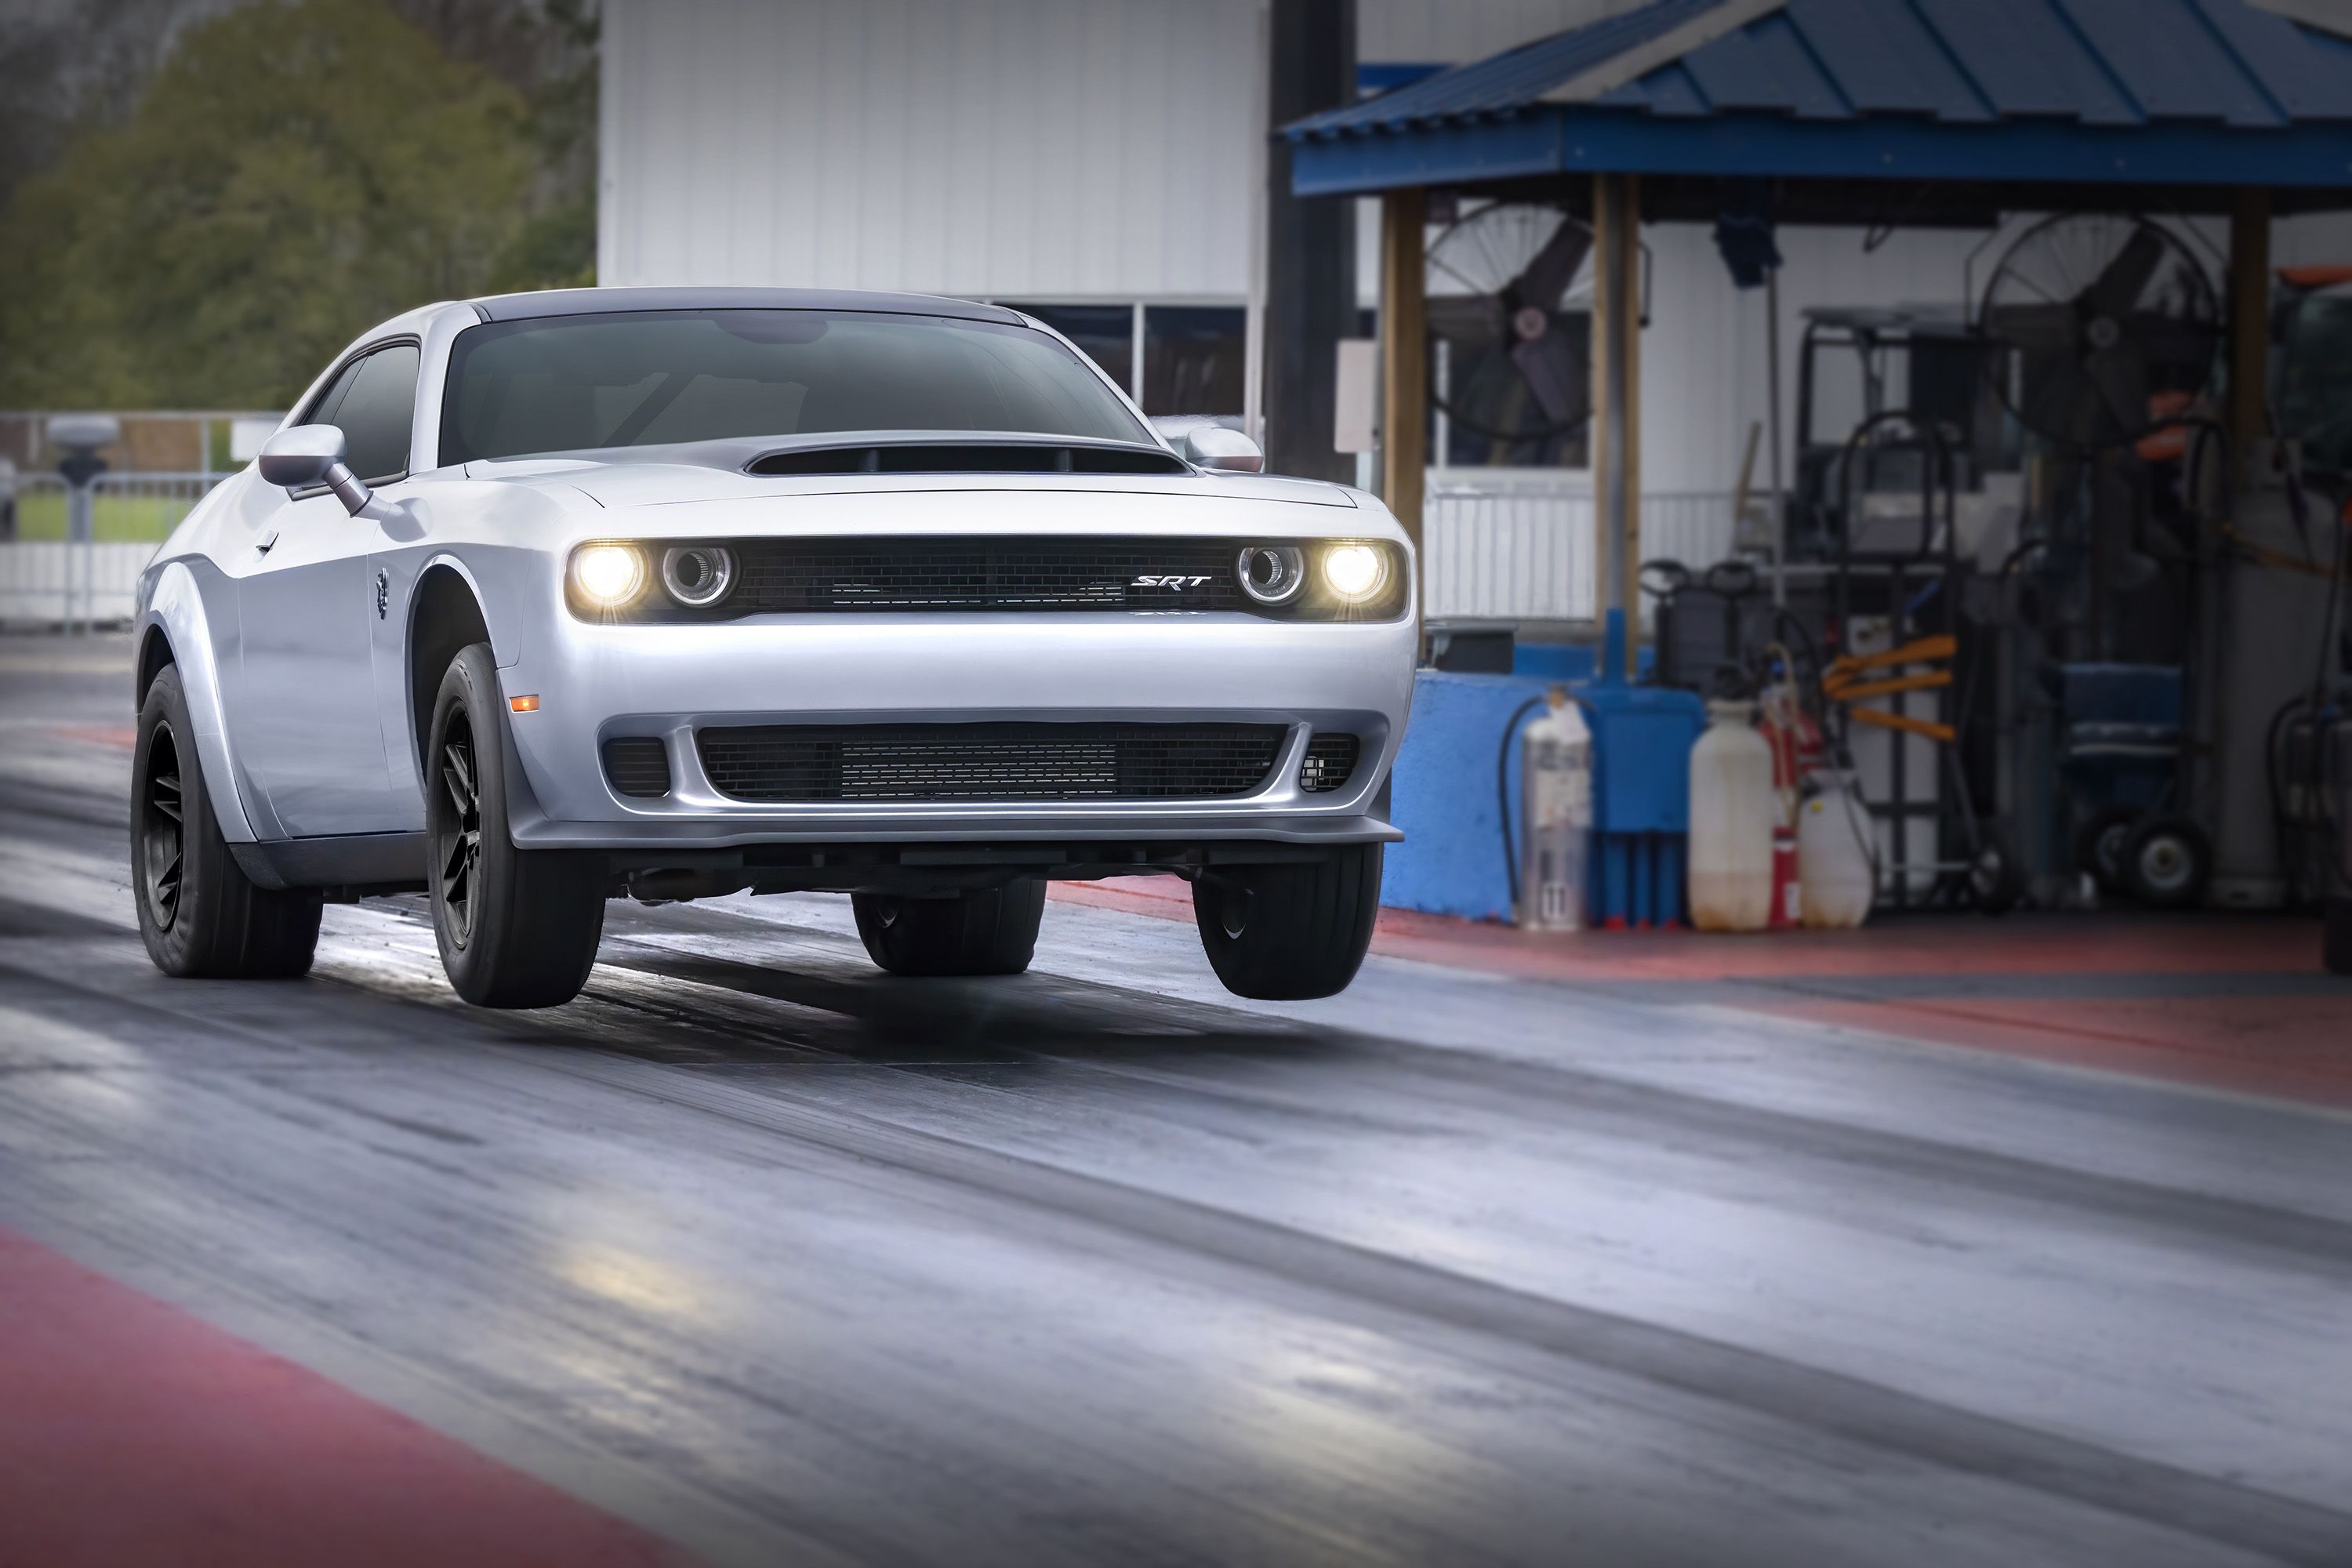 Dodge Demon 170: Everything You Need to Know